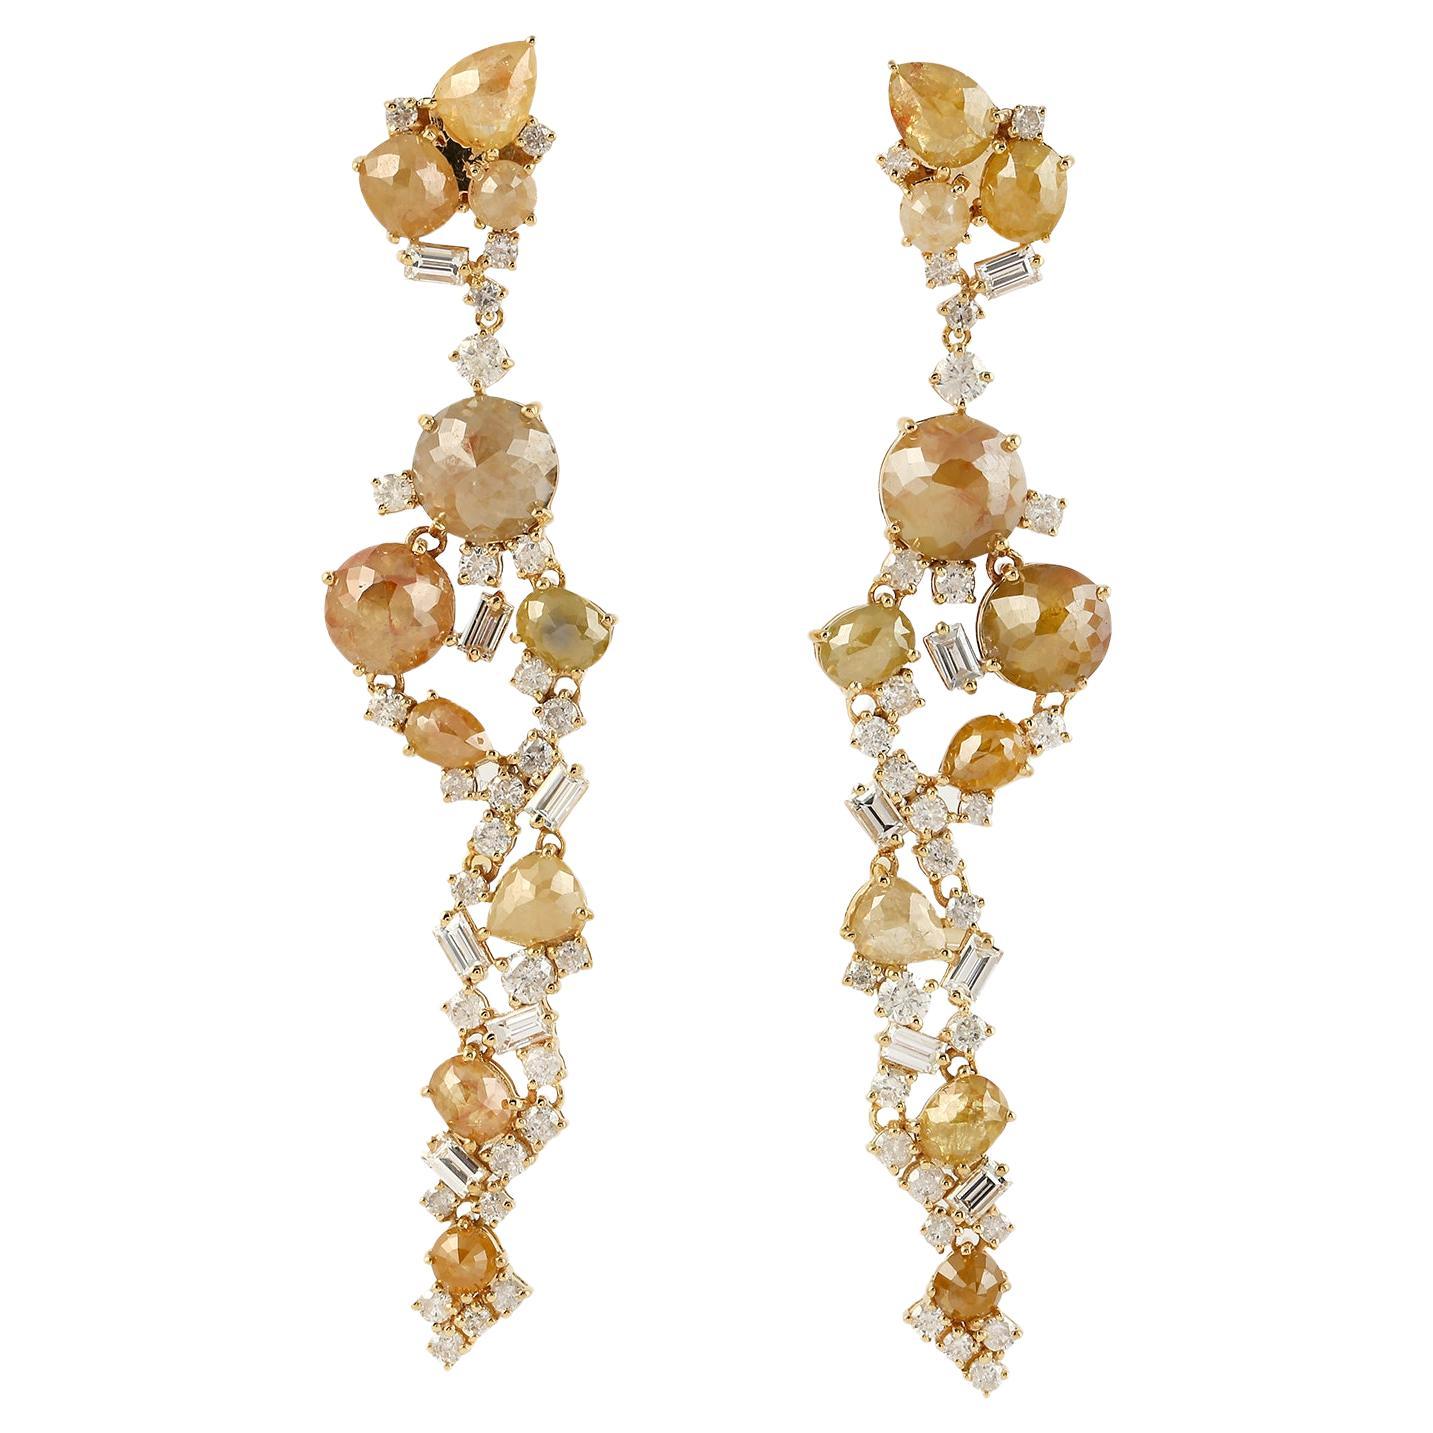 Rosecut Diamonds Earrings Made In 18k Yellow Gold For Sale